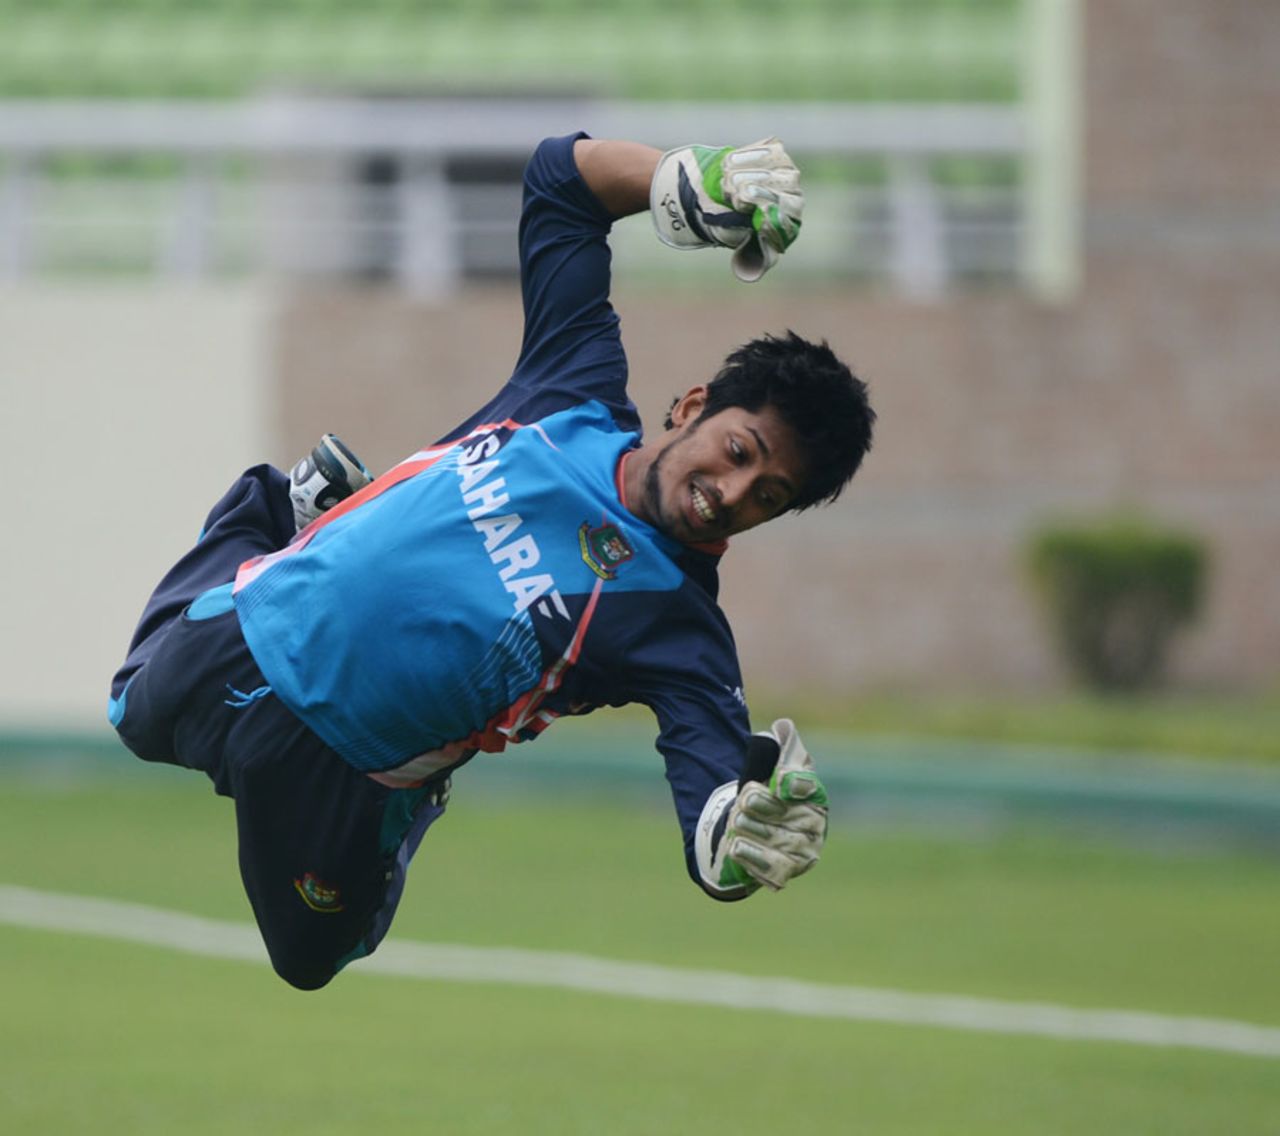 Anamul Haque attempts a diving catch during a training session, Dhaka, February 16, 2014